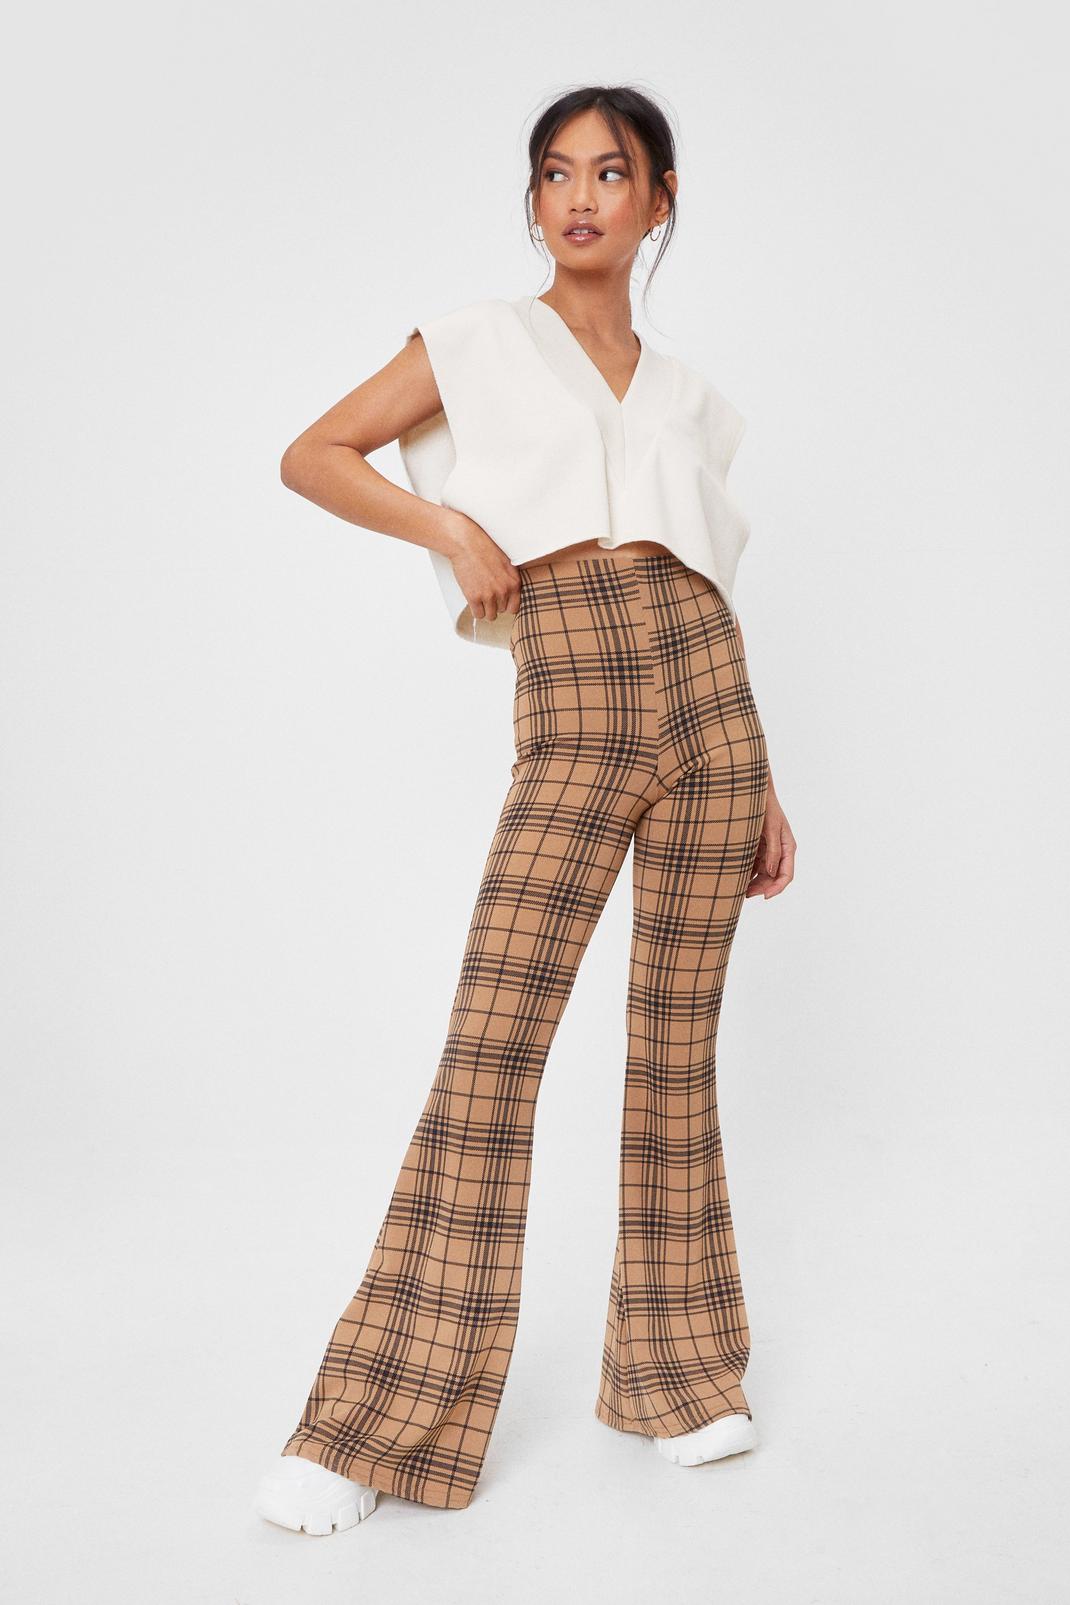 Retro Plaid Flare Pants in Black and Turquoise - The Sugarpuss